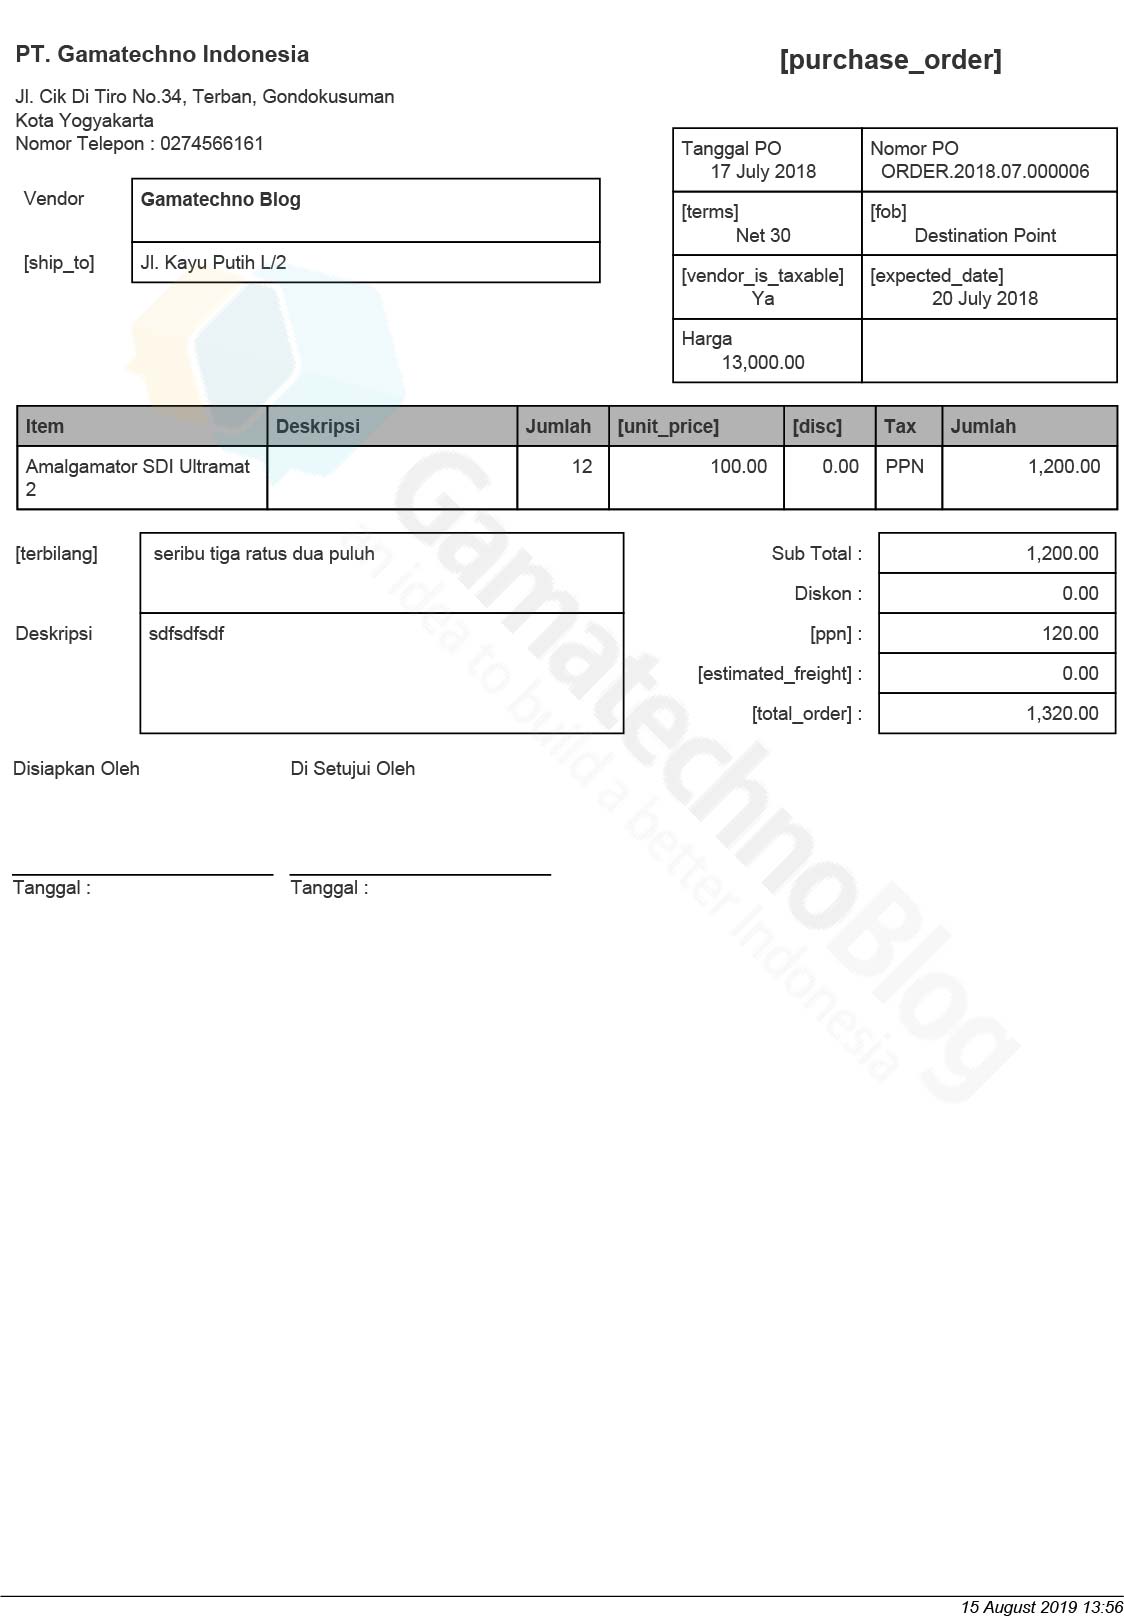 contoh purchase order, contoh format purchase order